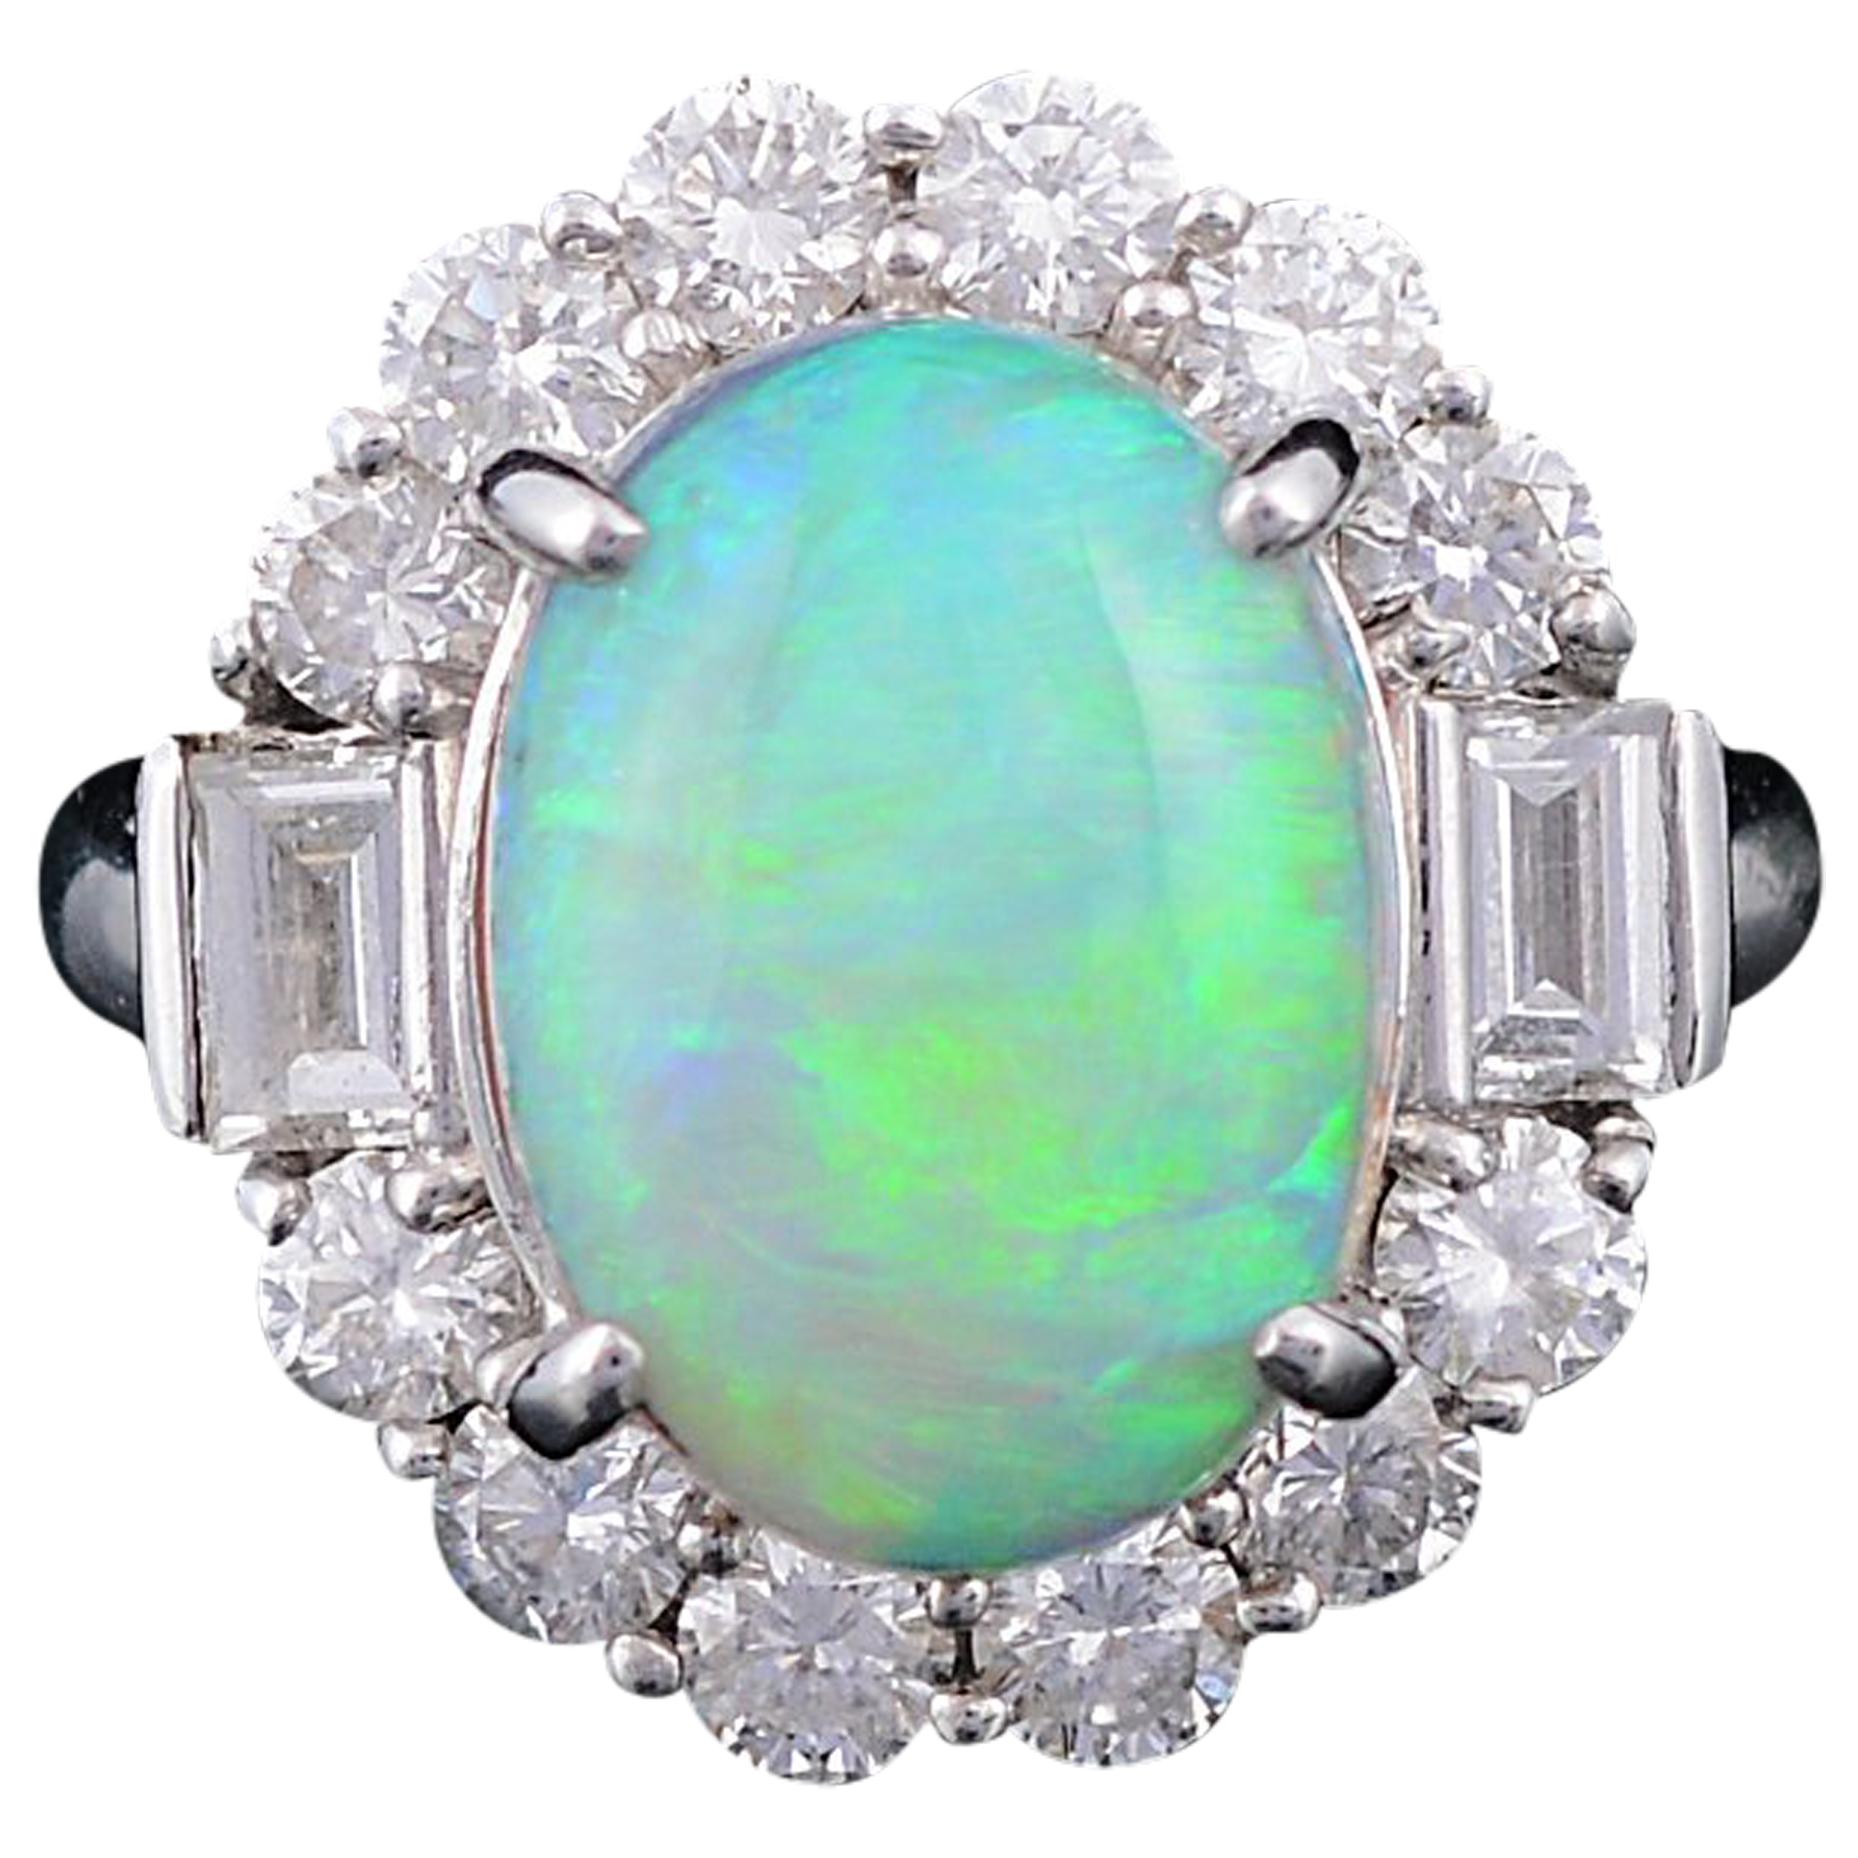 Set in Platinum 900, Australian Opal and Diamonds Wedding or Engagement Ring